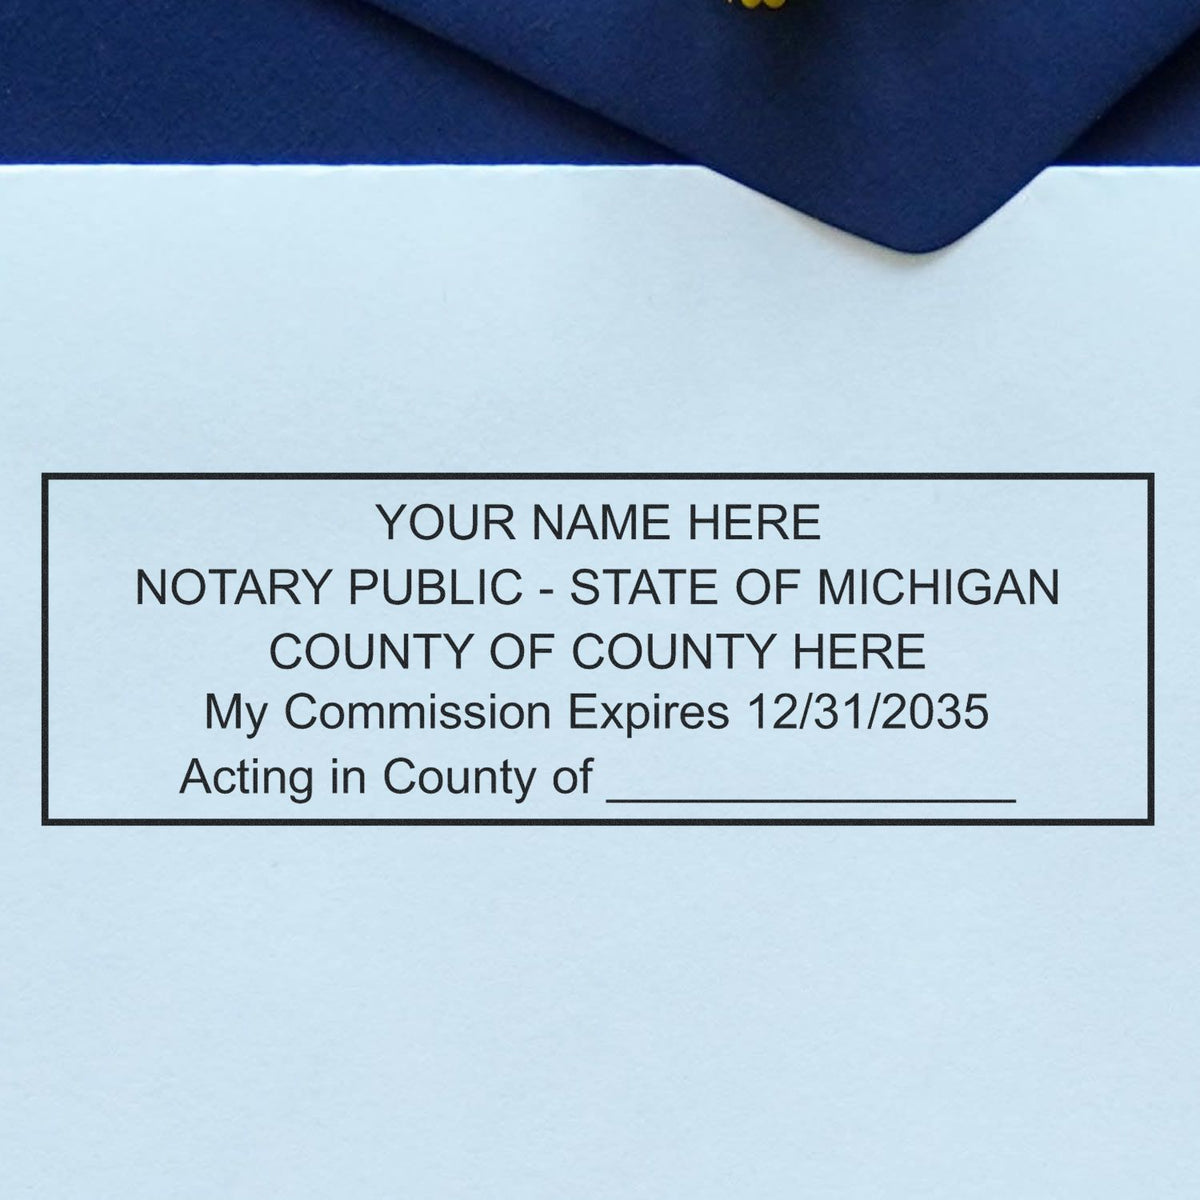 An alternative view of the PSI Michigan Notary Stamp stamped on a sheet of paper showing the image in use